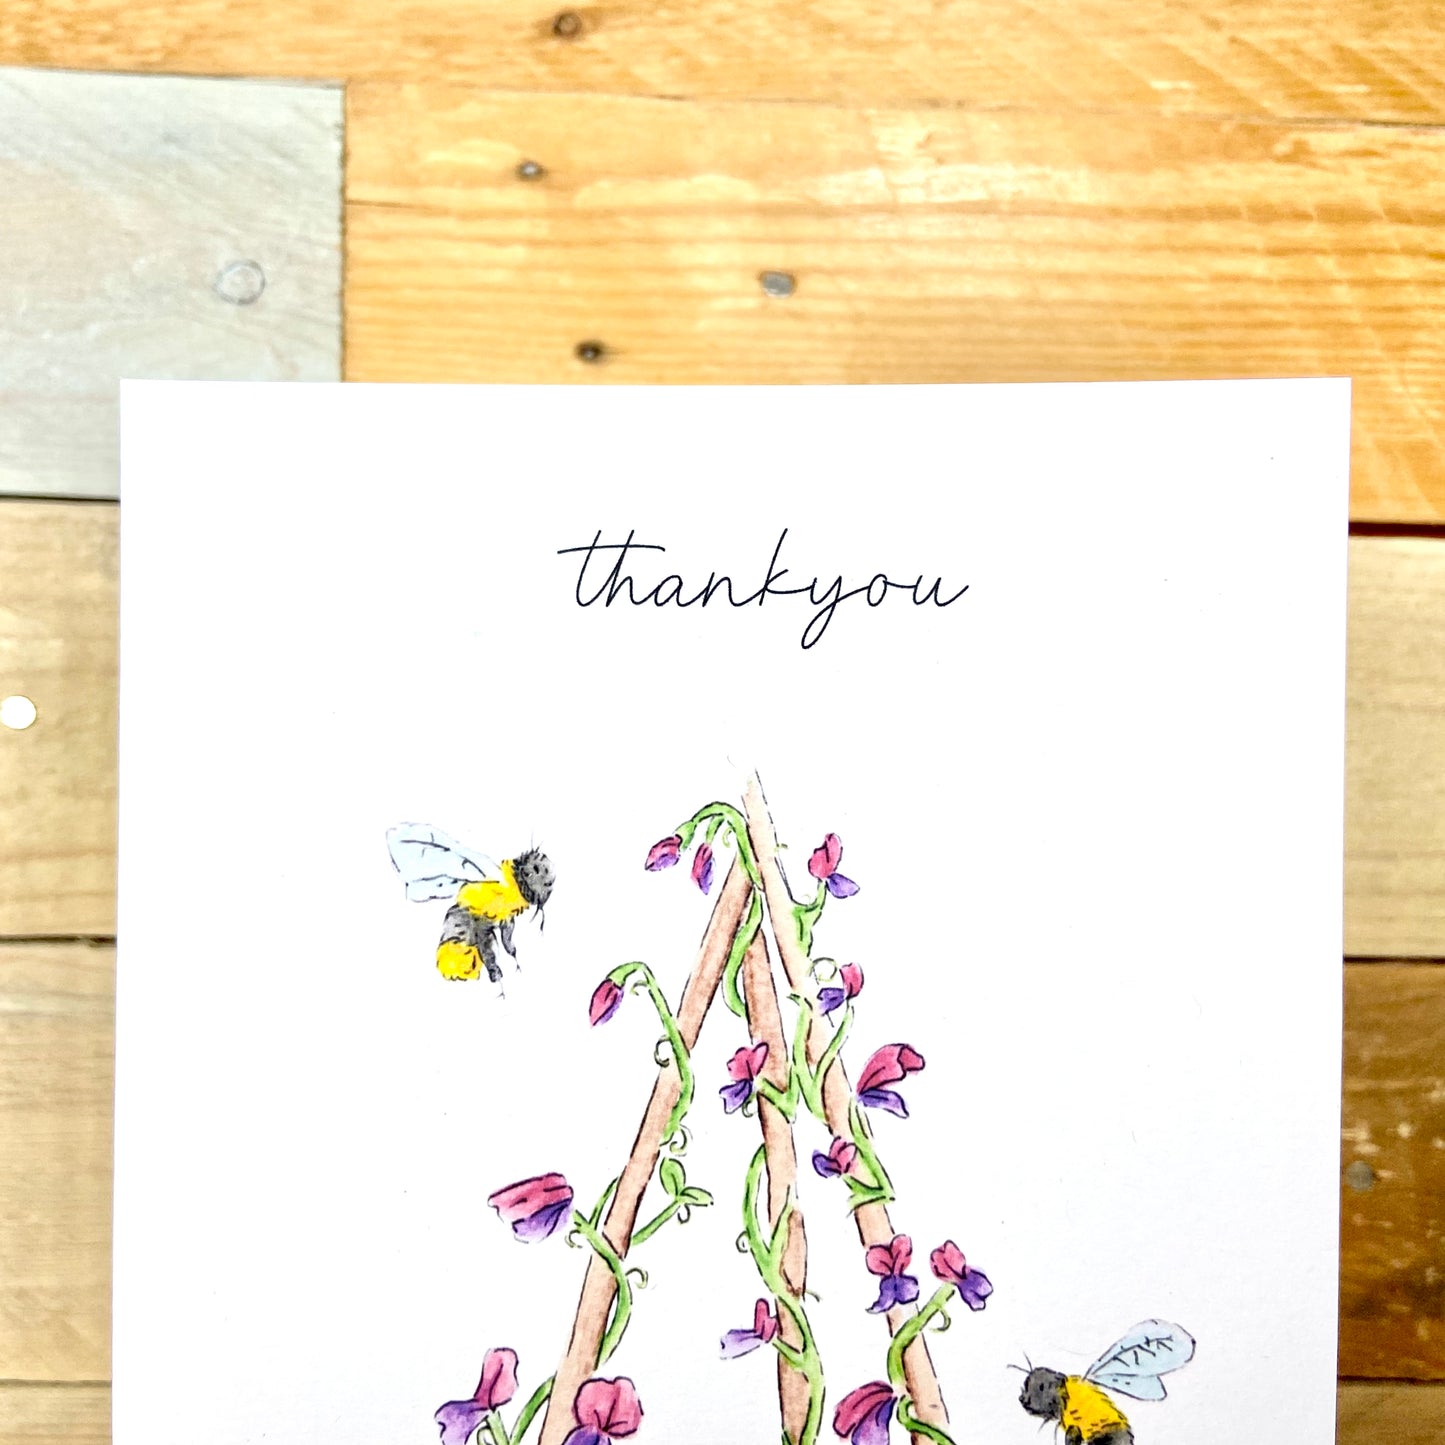 Sweetepeas and Bumble Bees Seeded Thankyou Card